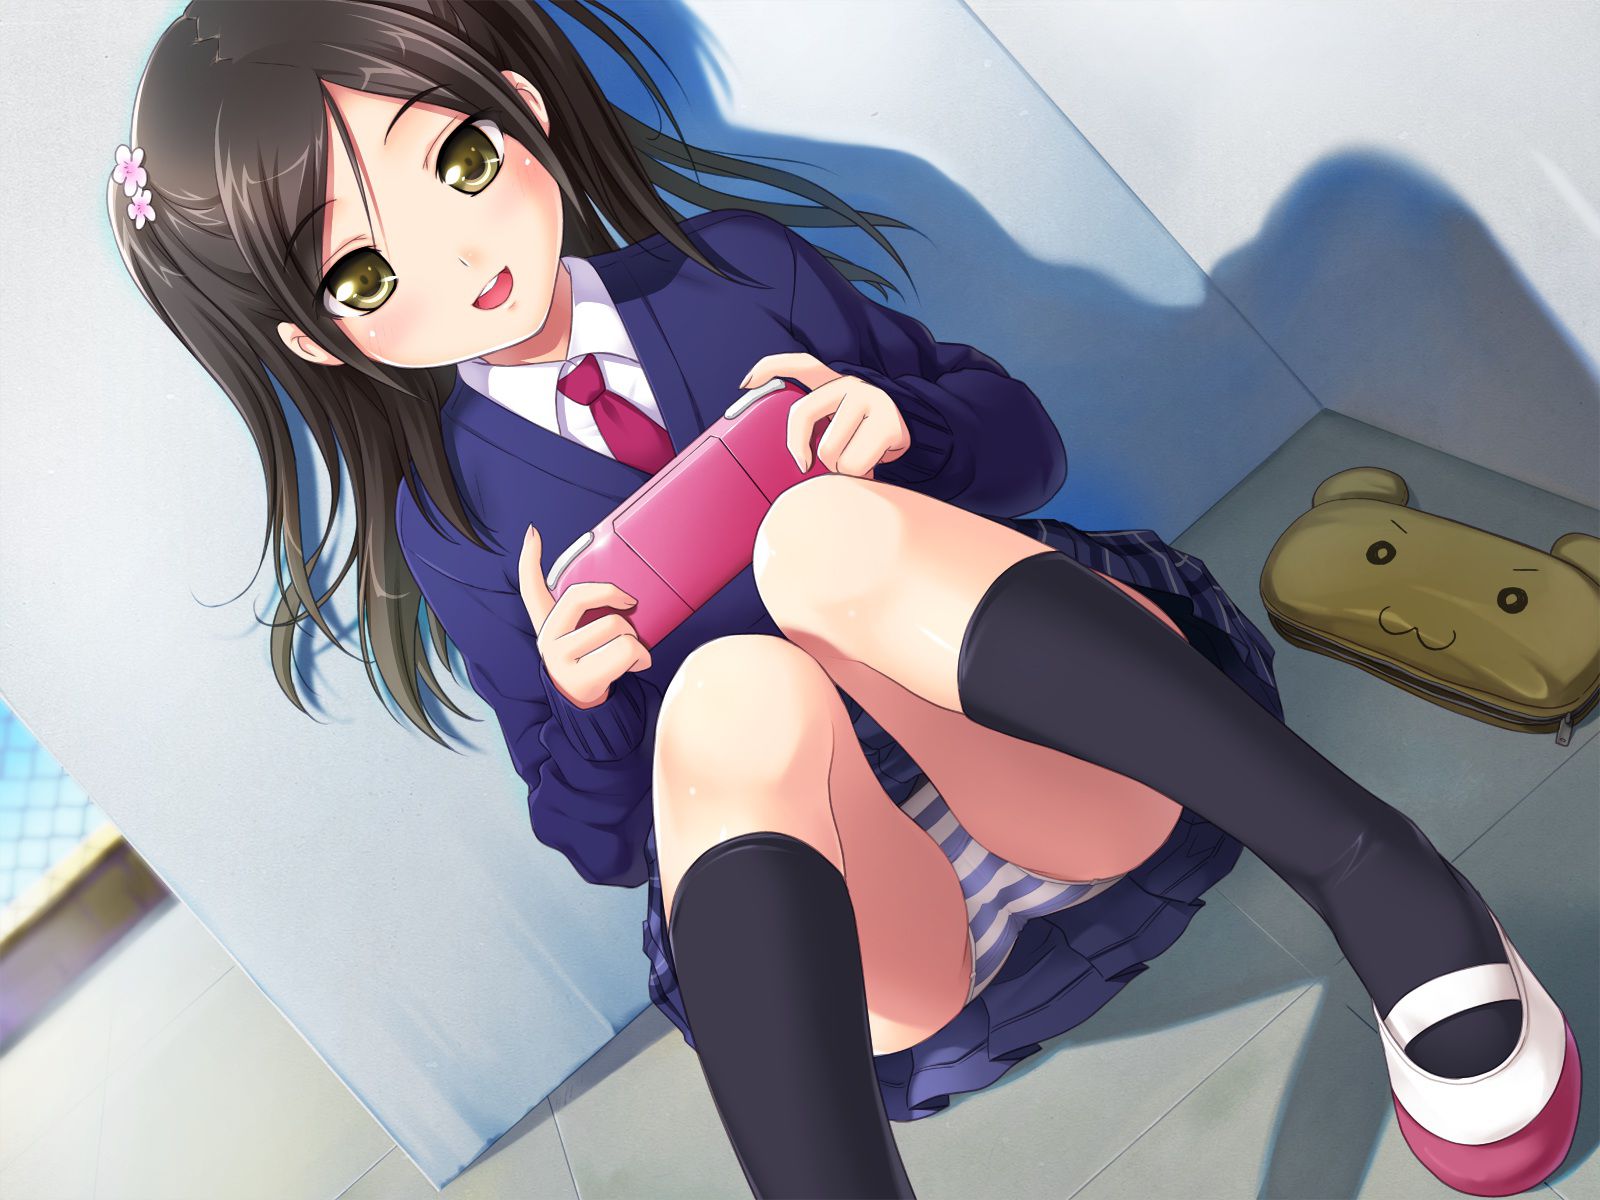 Cute girl games (second-ZIP) Rainbow images please 6